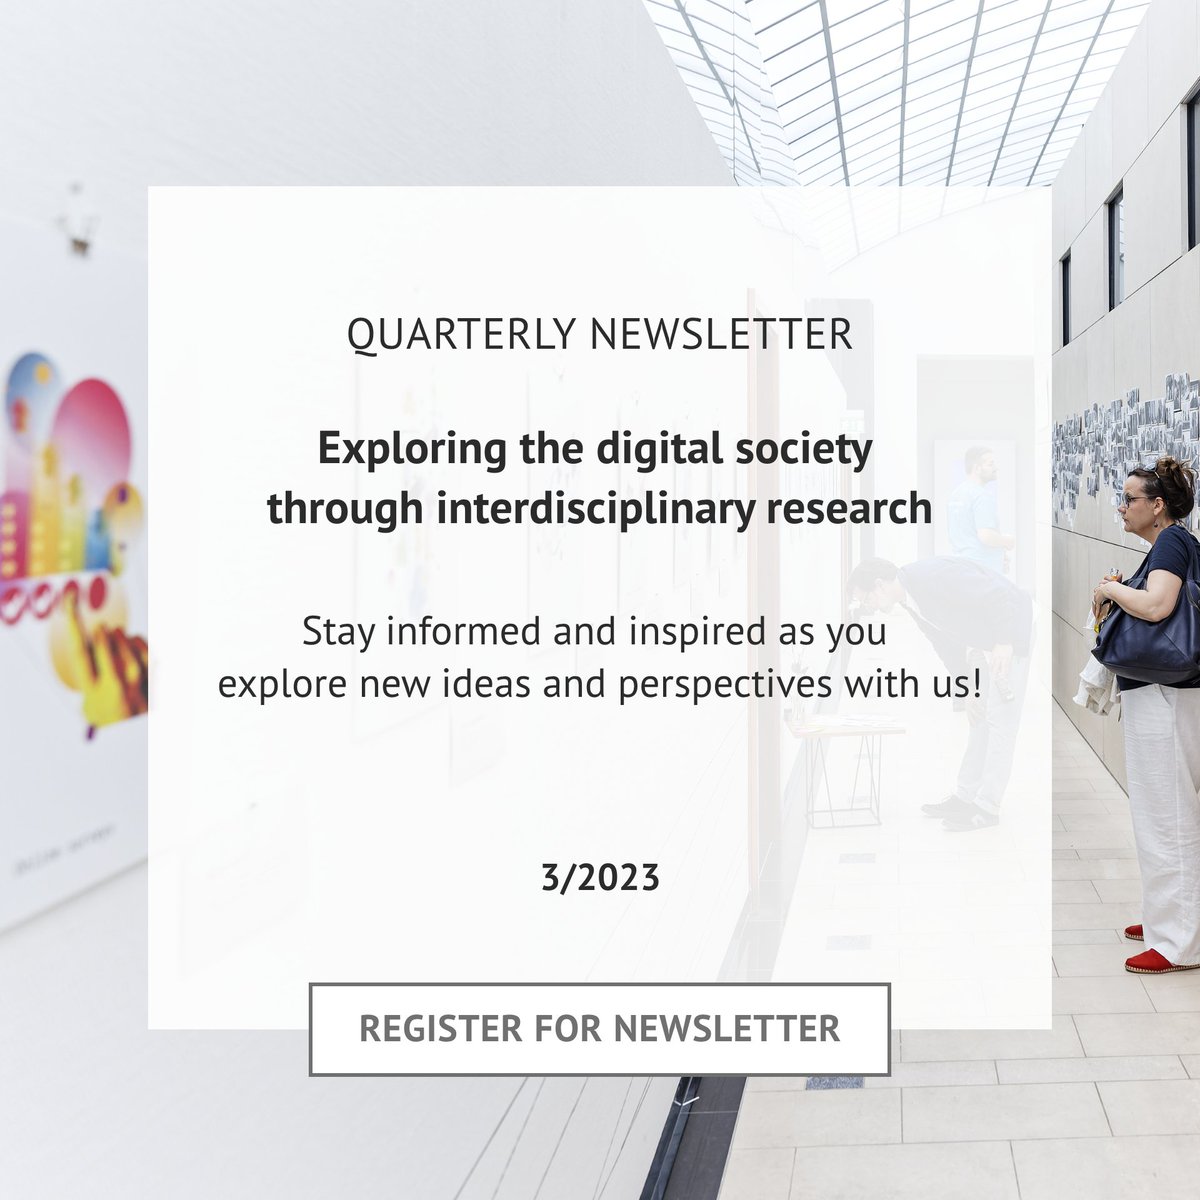 Navigating #AI debates, regulating #digital platforms, and #tech's role in #sustainability? Our Quarterly #newsletter highlights how HIIG is addressing these pressing issues with innovative #academic formats and #interdisciplinary research. Register here: hiig.de/en/newsletter-…